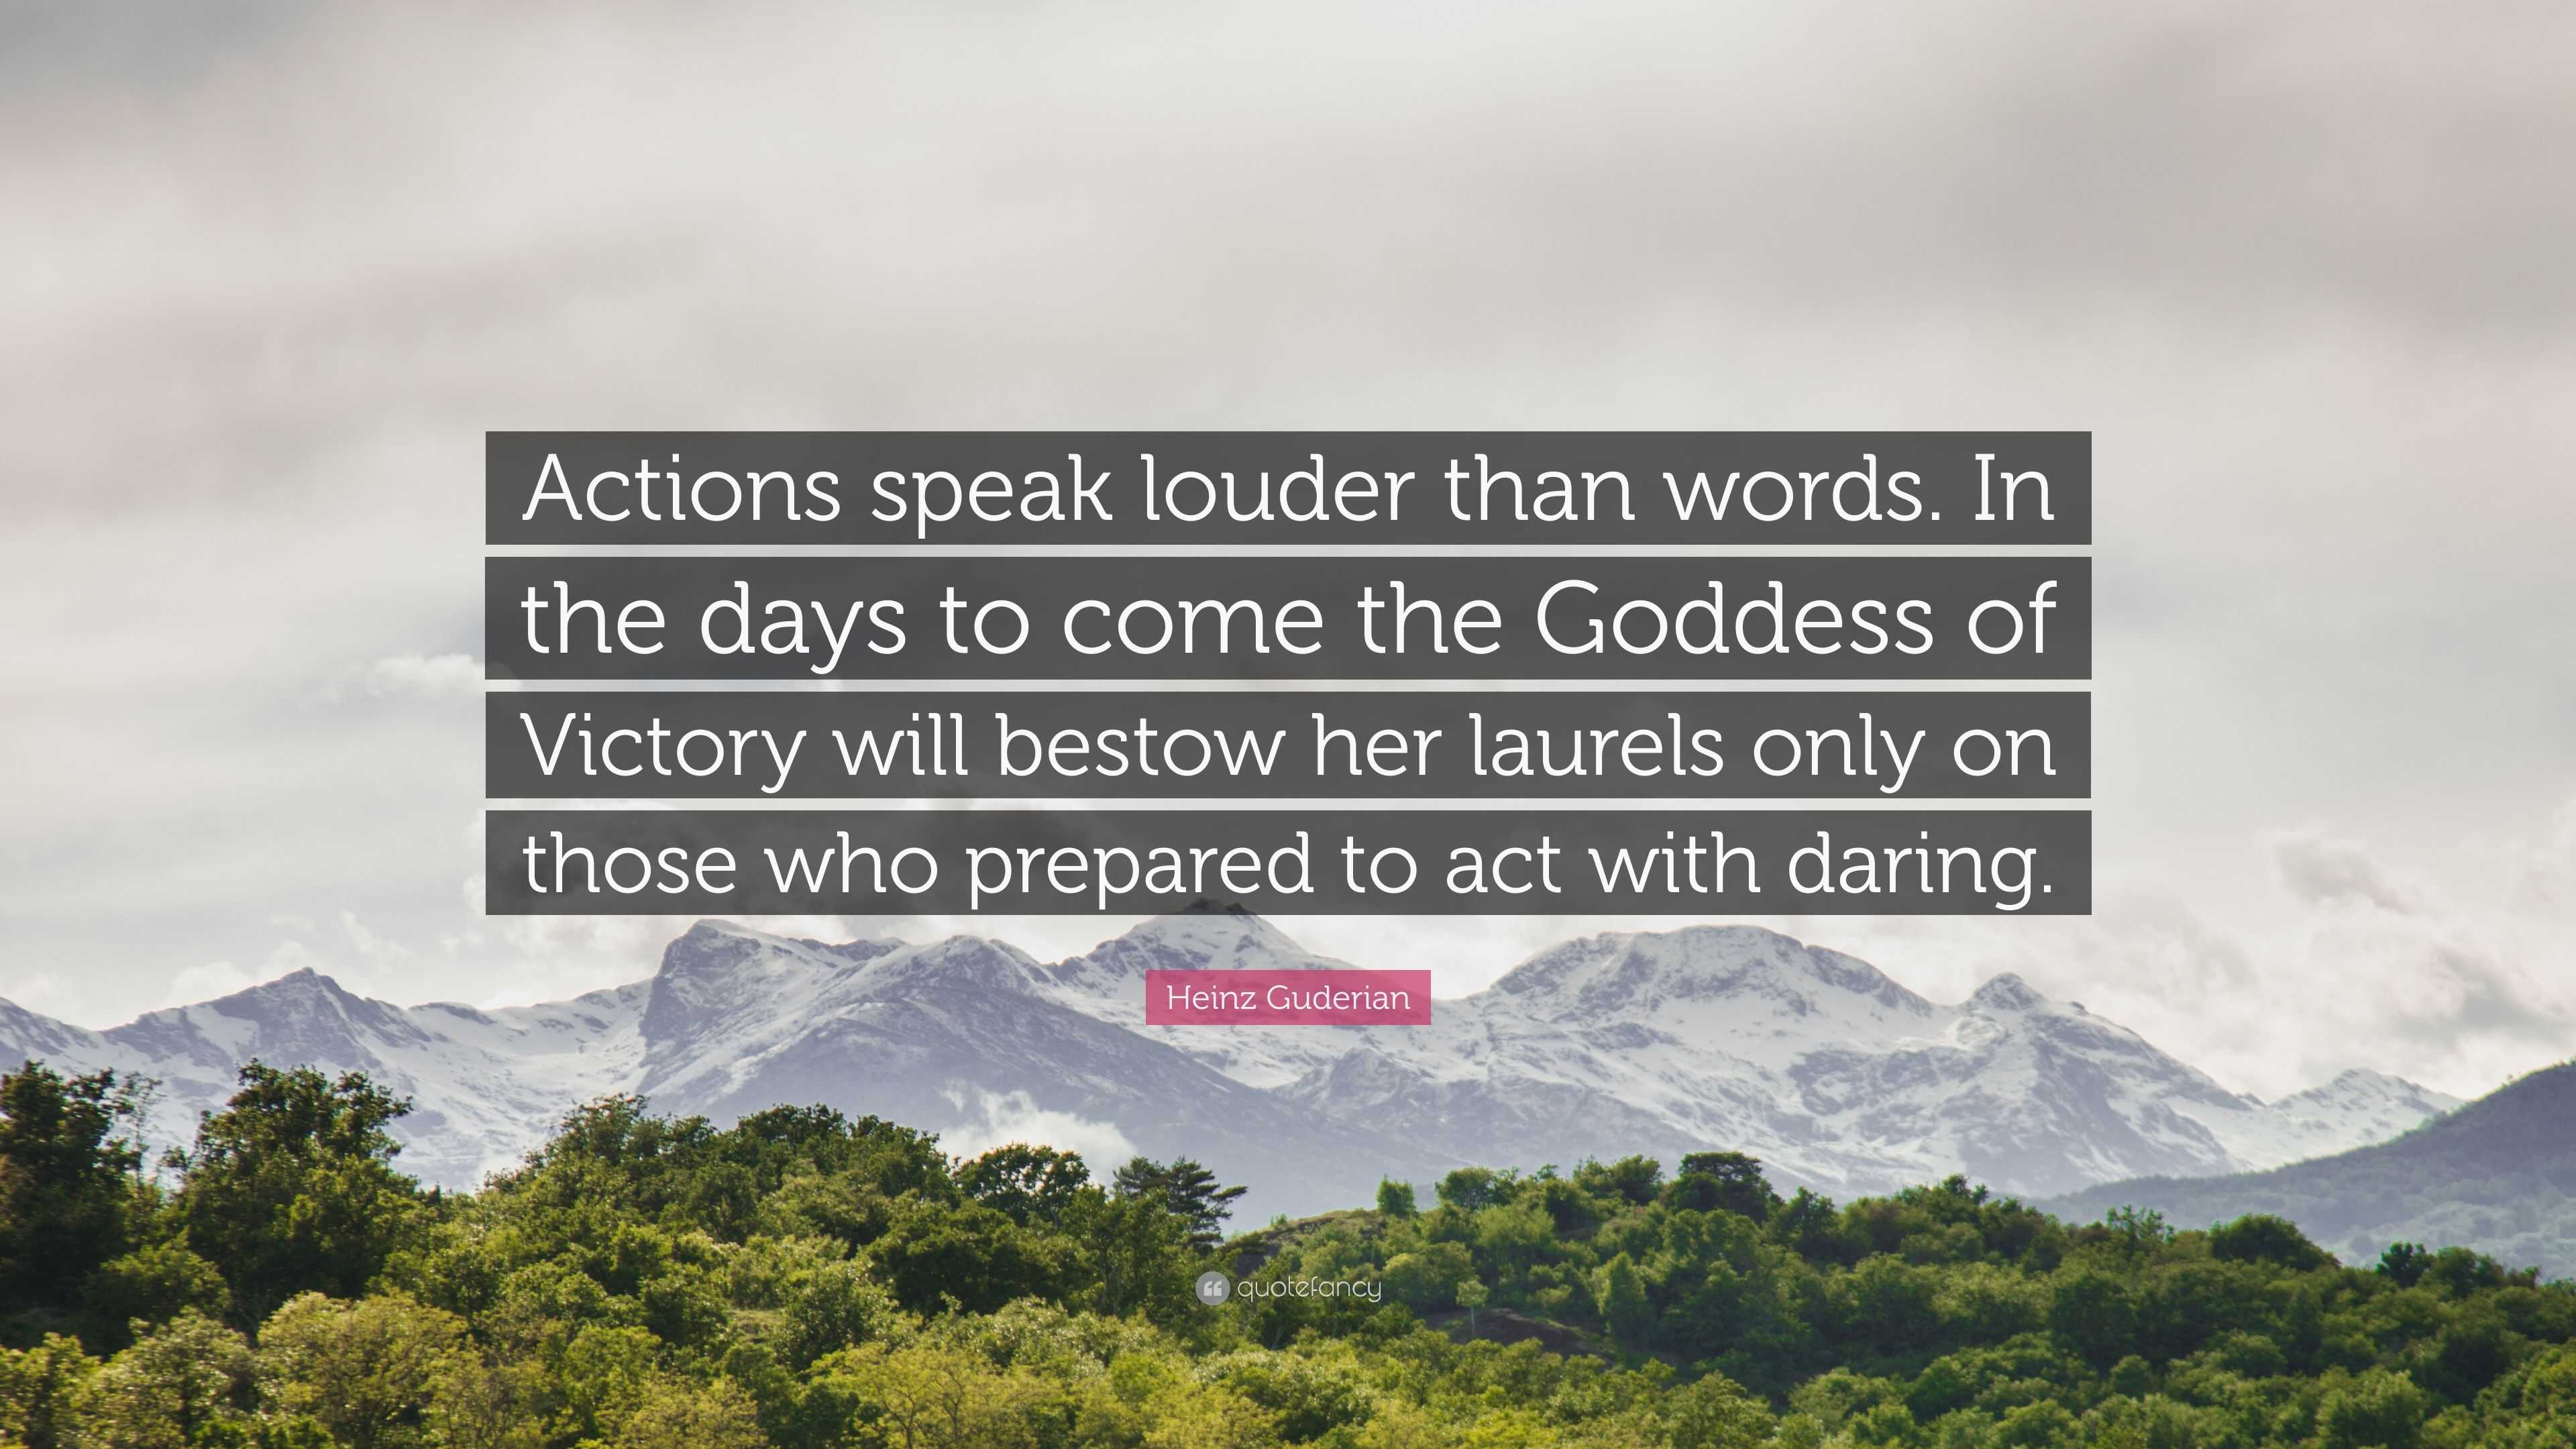 Heinz Guderian Quote: “Actions speak louder than words. In the days to come  the Goddess of Victory will bestow her laurels only on those who pr”